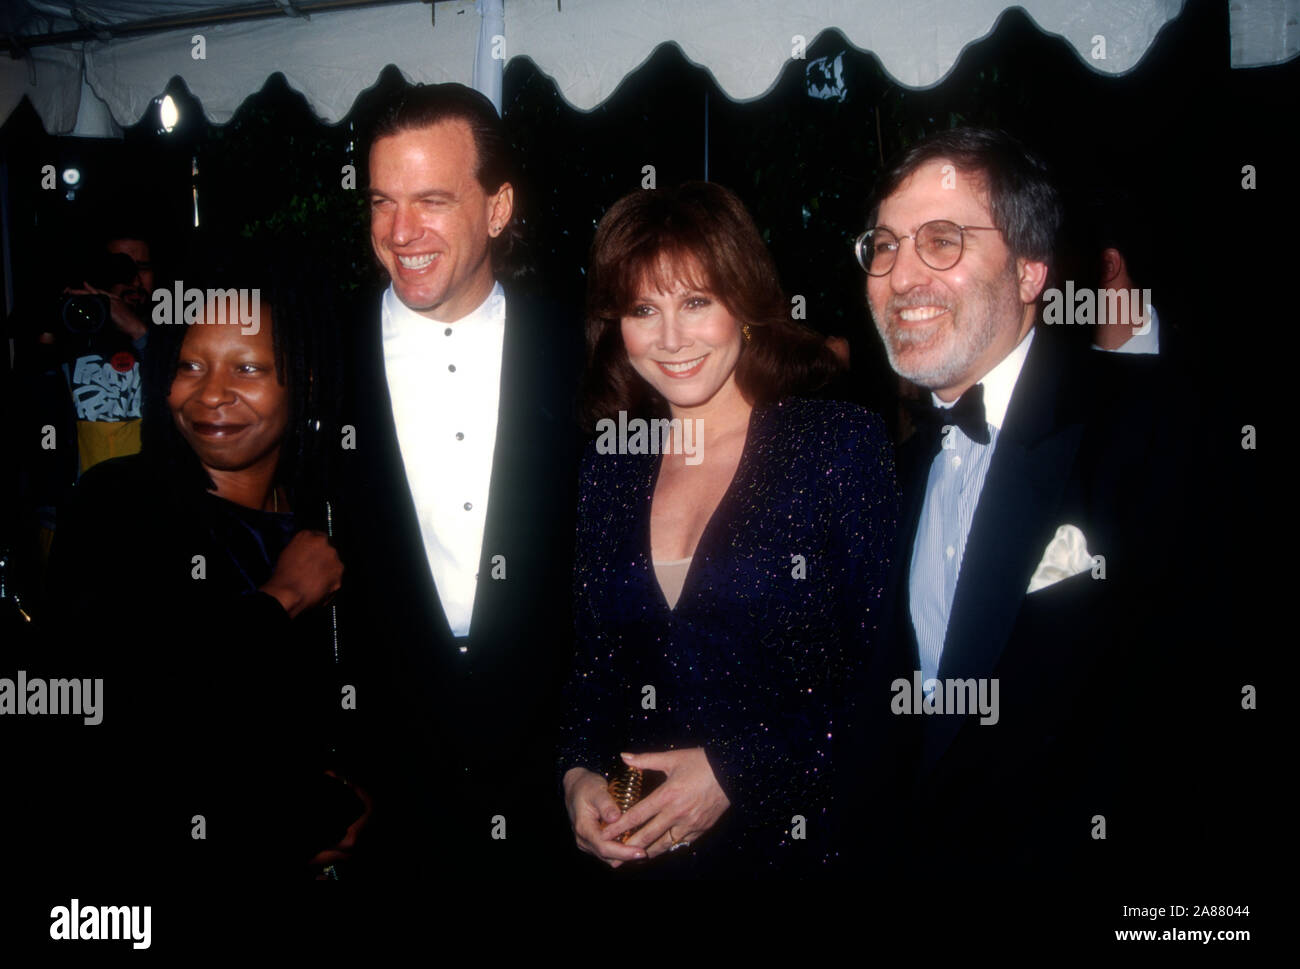 Universal City, California, USA 5th March 1995 Comedian/actress Whoopi Goldberg, Lyle Trachtenberg, actress Michele Lee and husband Fred A. Rappoport attend the 21st Annual People's Choice Awards on March 5, 1995 at Sound Stage 12, Universal Studios in Universal City, California, USA. Photo by Barry King/Alamy Stock Photo Stock Photo